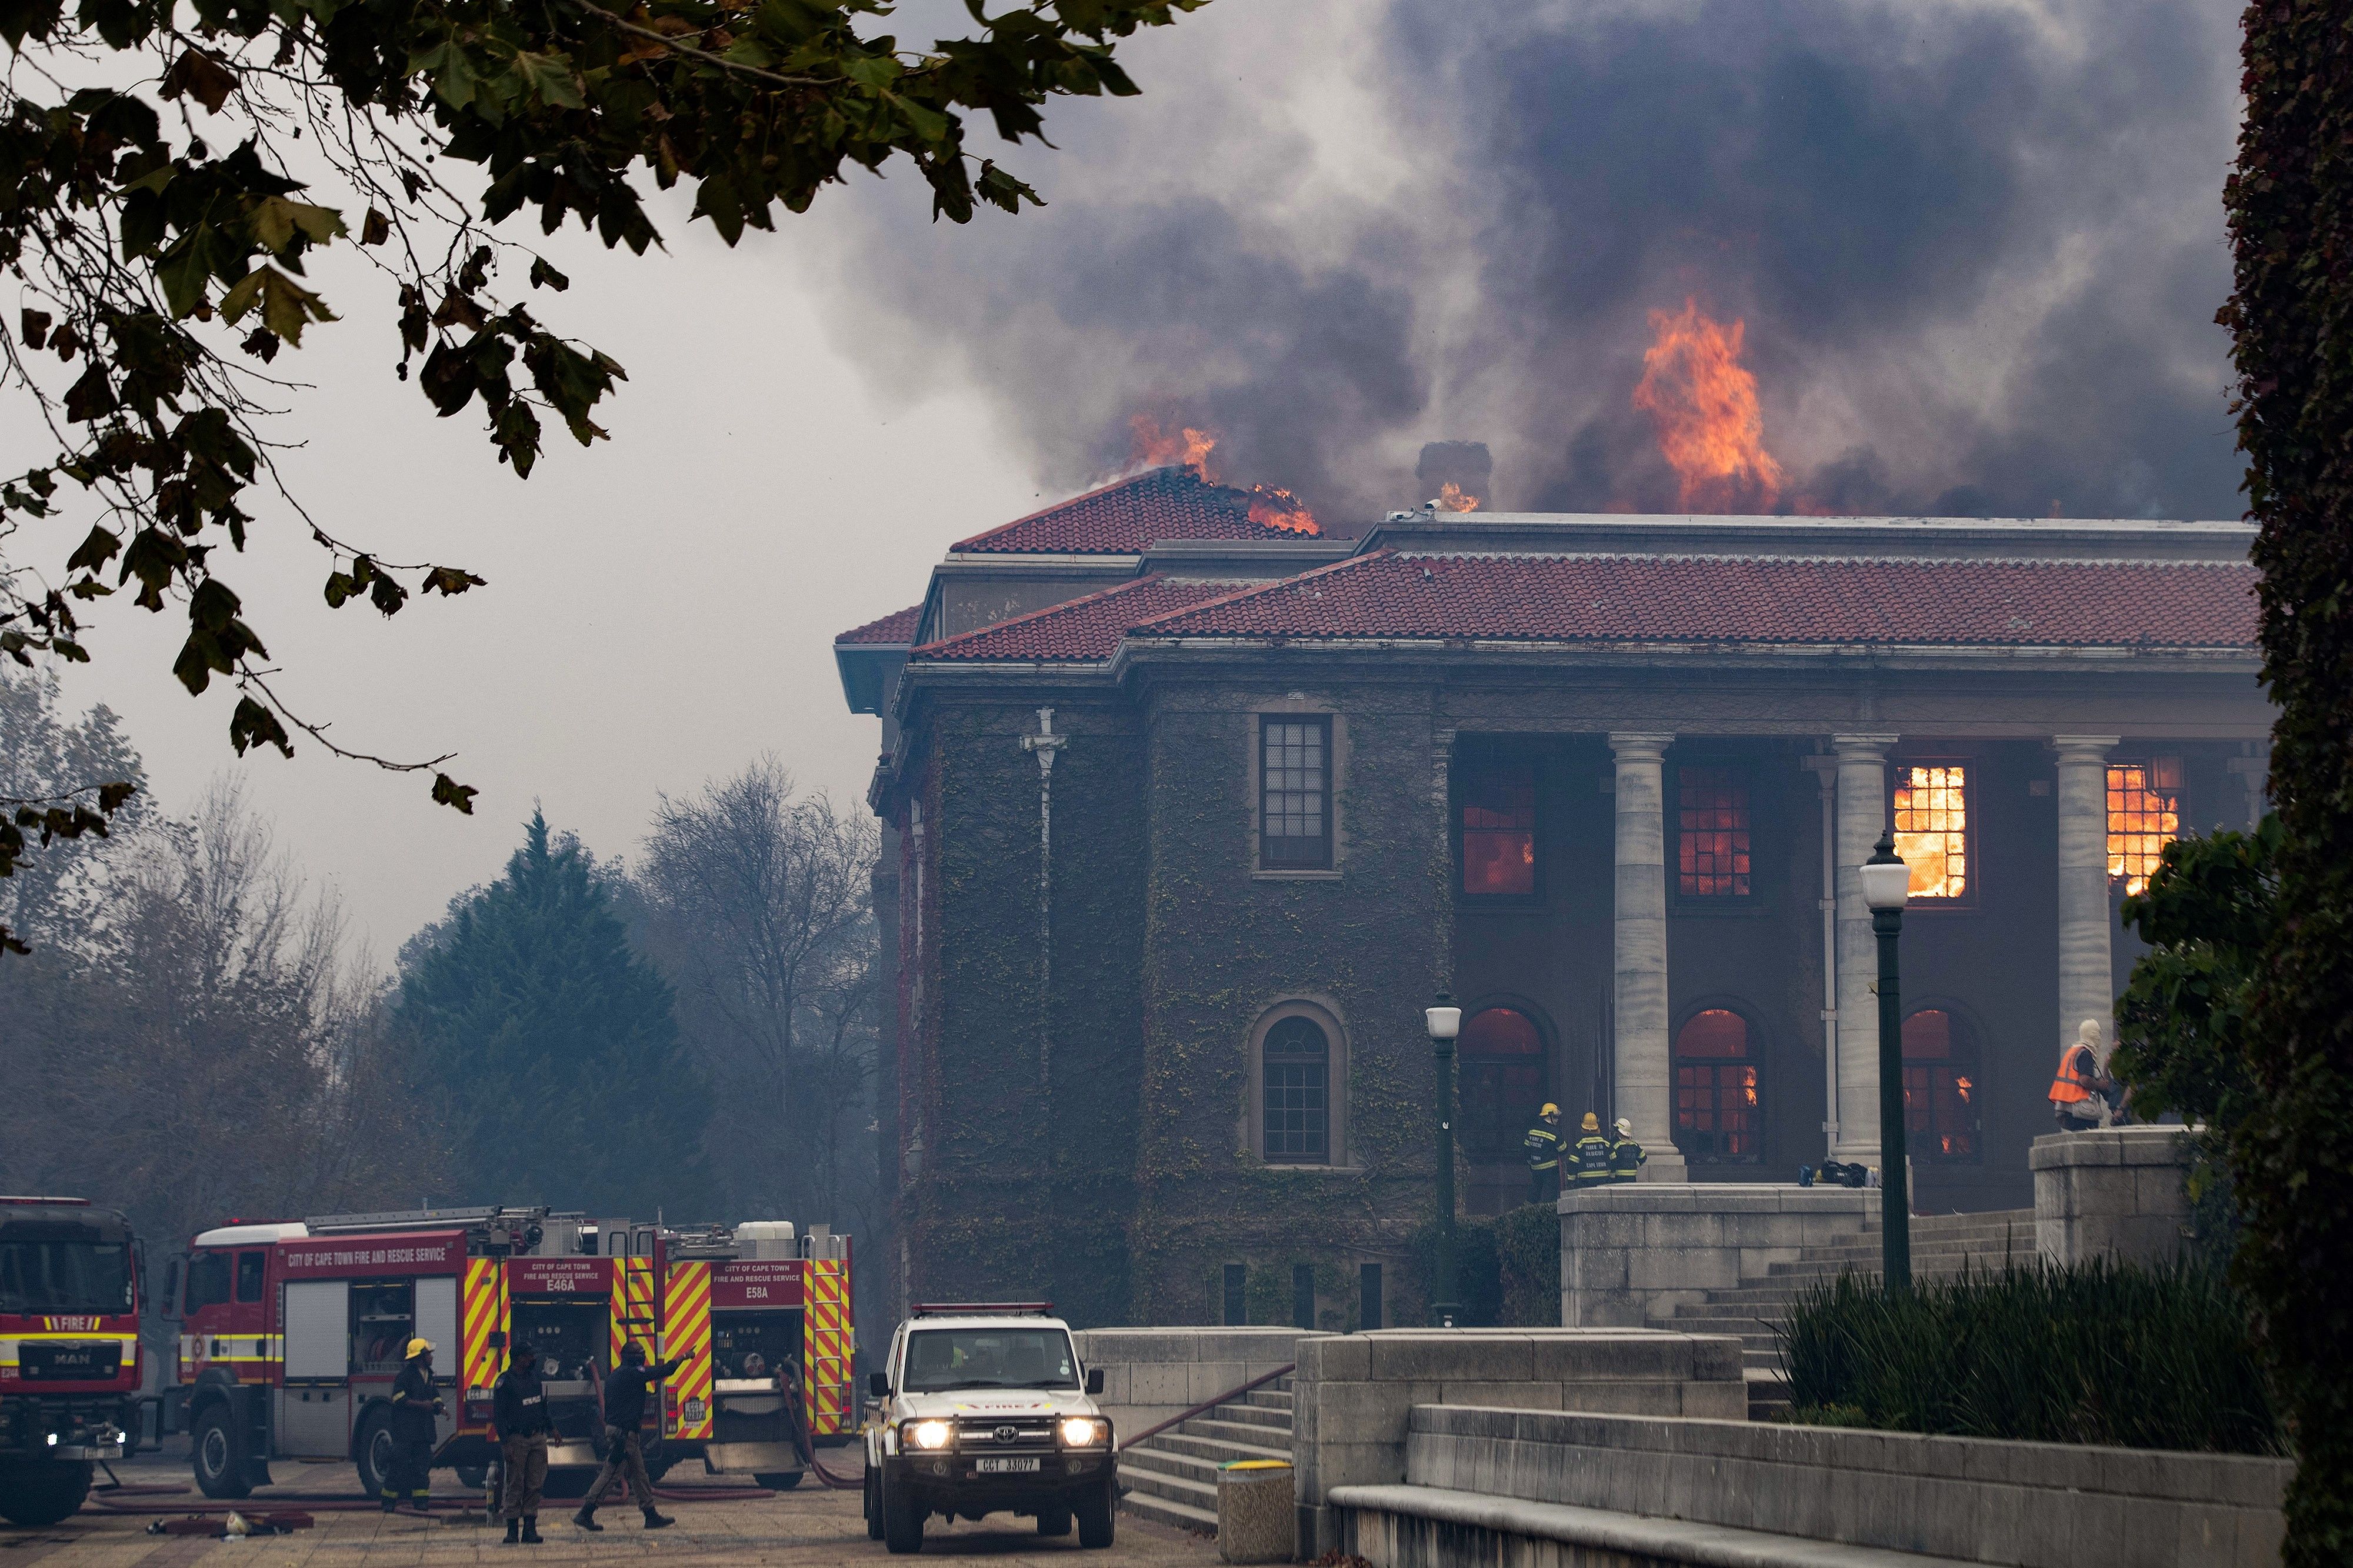 Firefighters try, in vain, to extinguish a fire in the Jagger Library, at the University of Cape Town